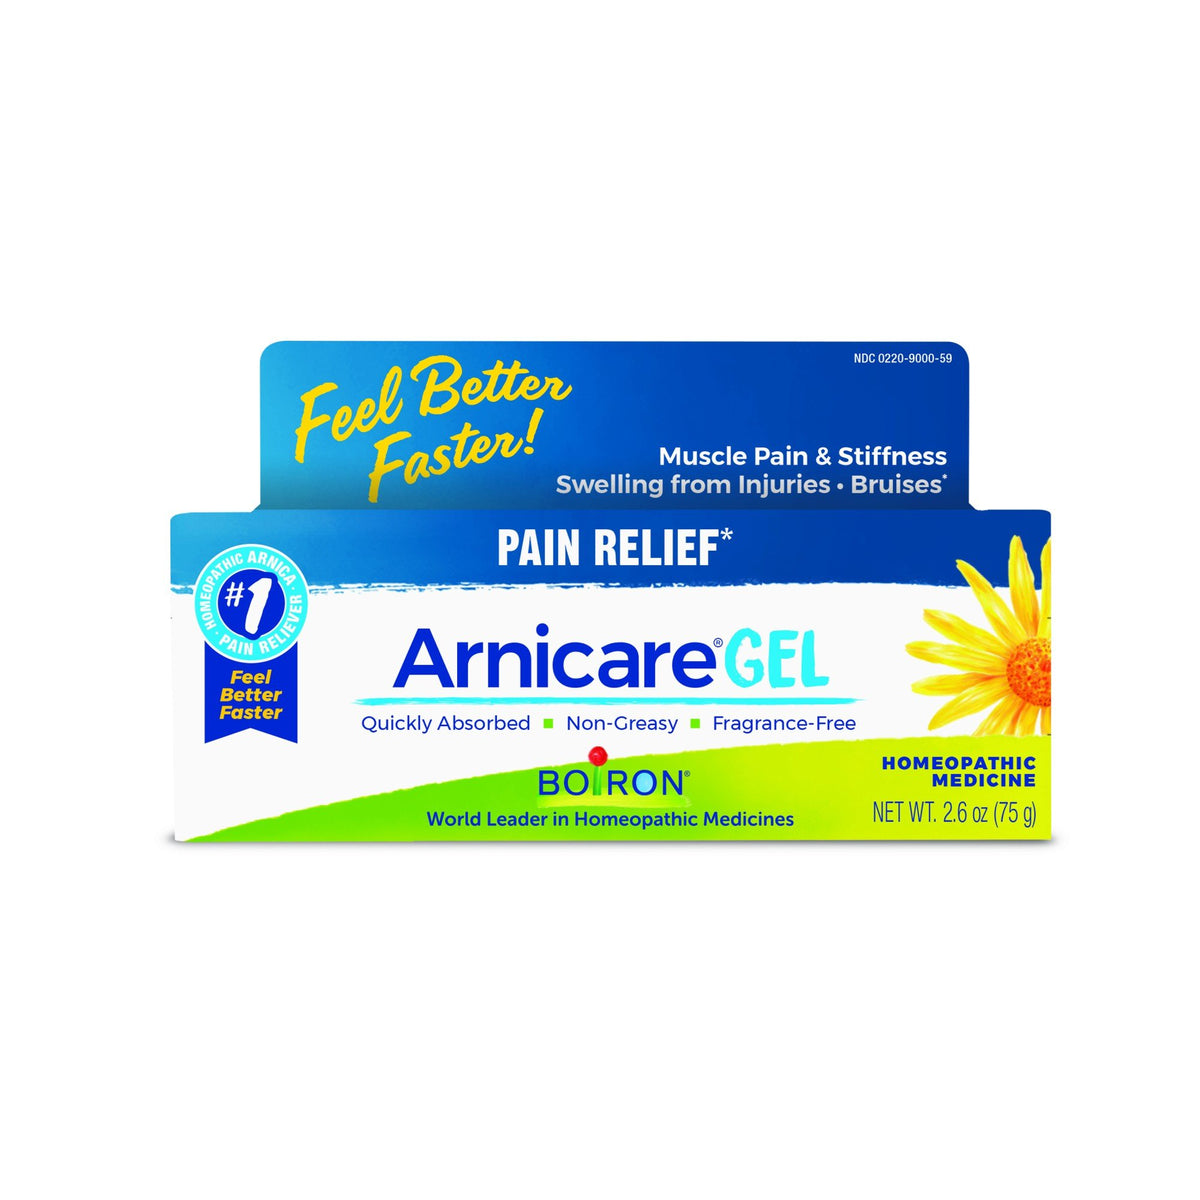 Boiron Arnicare Gel (5th Panel) Homeopathic Medicine For Pain Relief 2.6 oz Gel